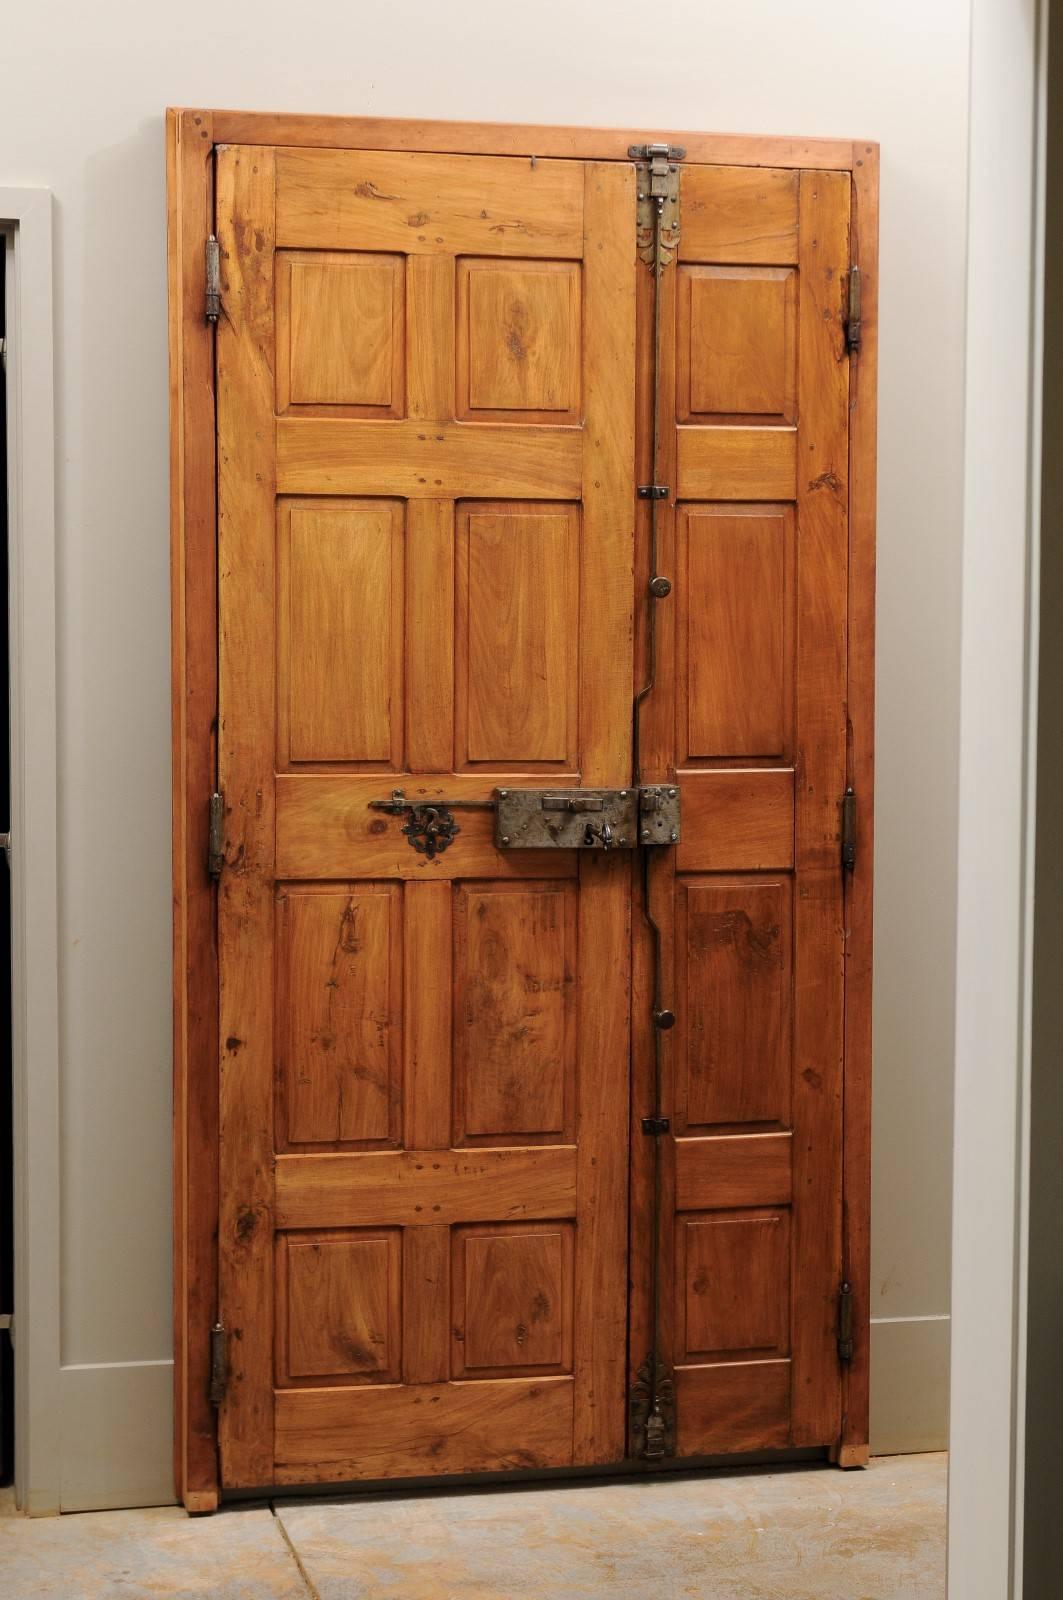 A French 18th century wooden door with custom door frame and original hardware. This elegant French carved wood door features two panels adorned with simple alternating raised square and rectangular motifs. The door retains its original hardware